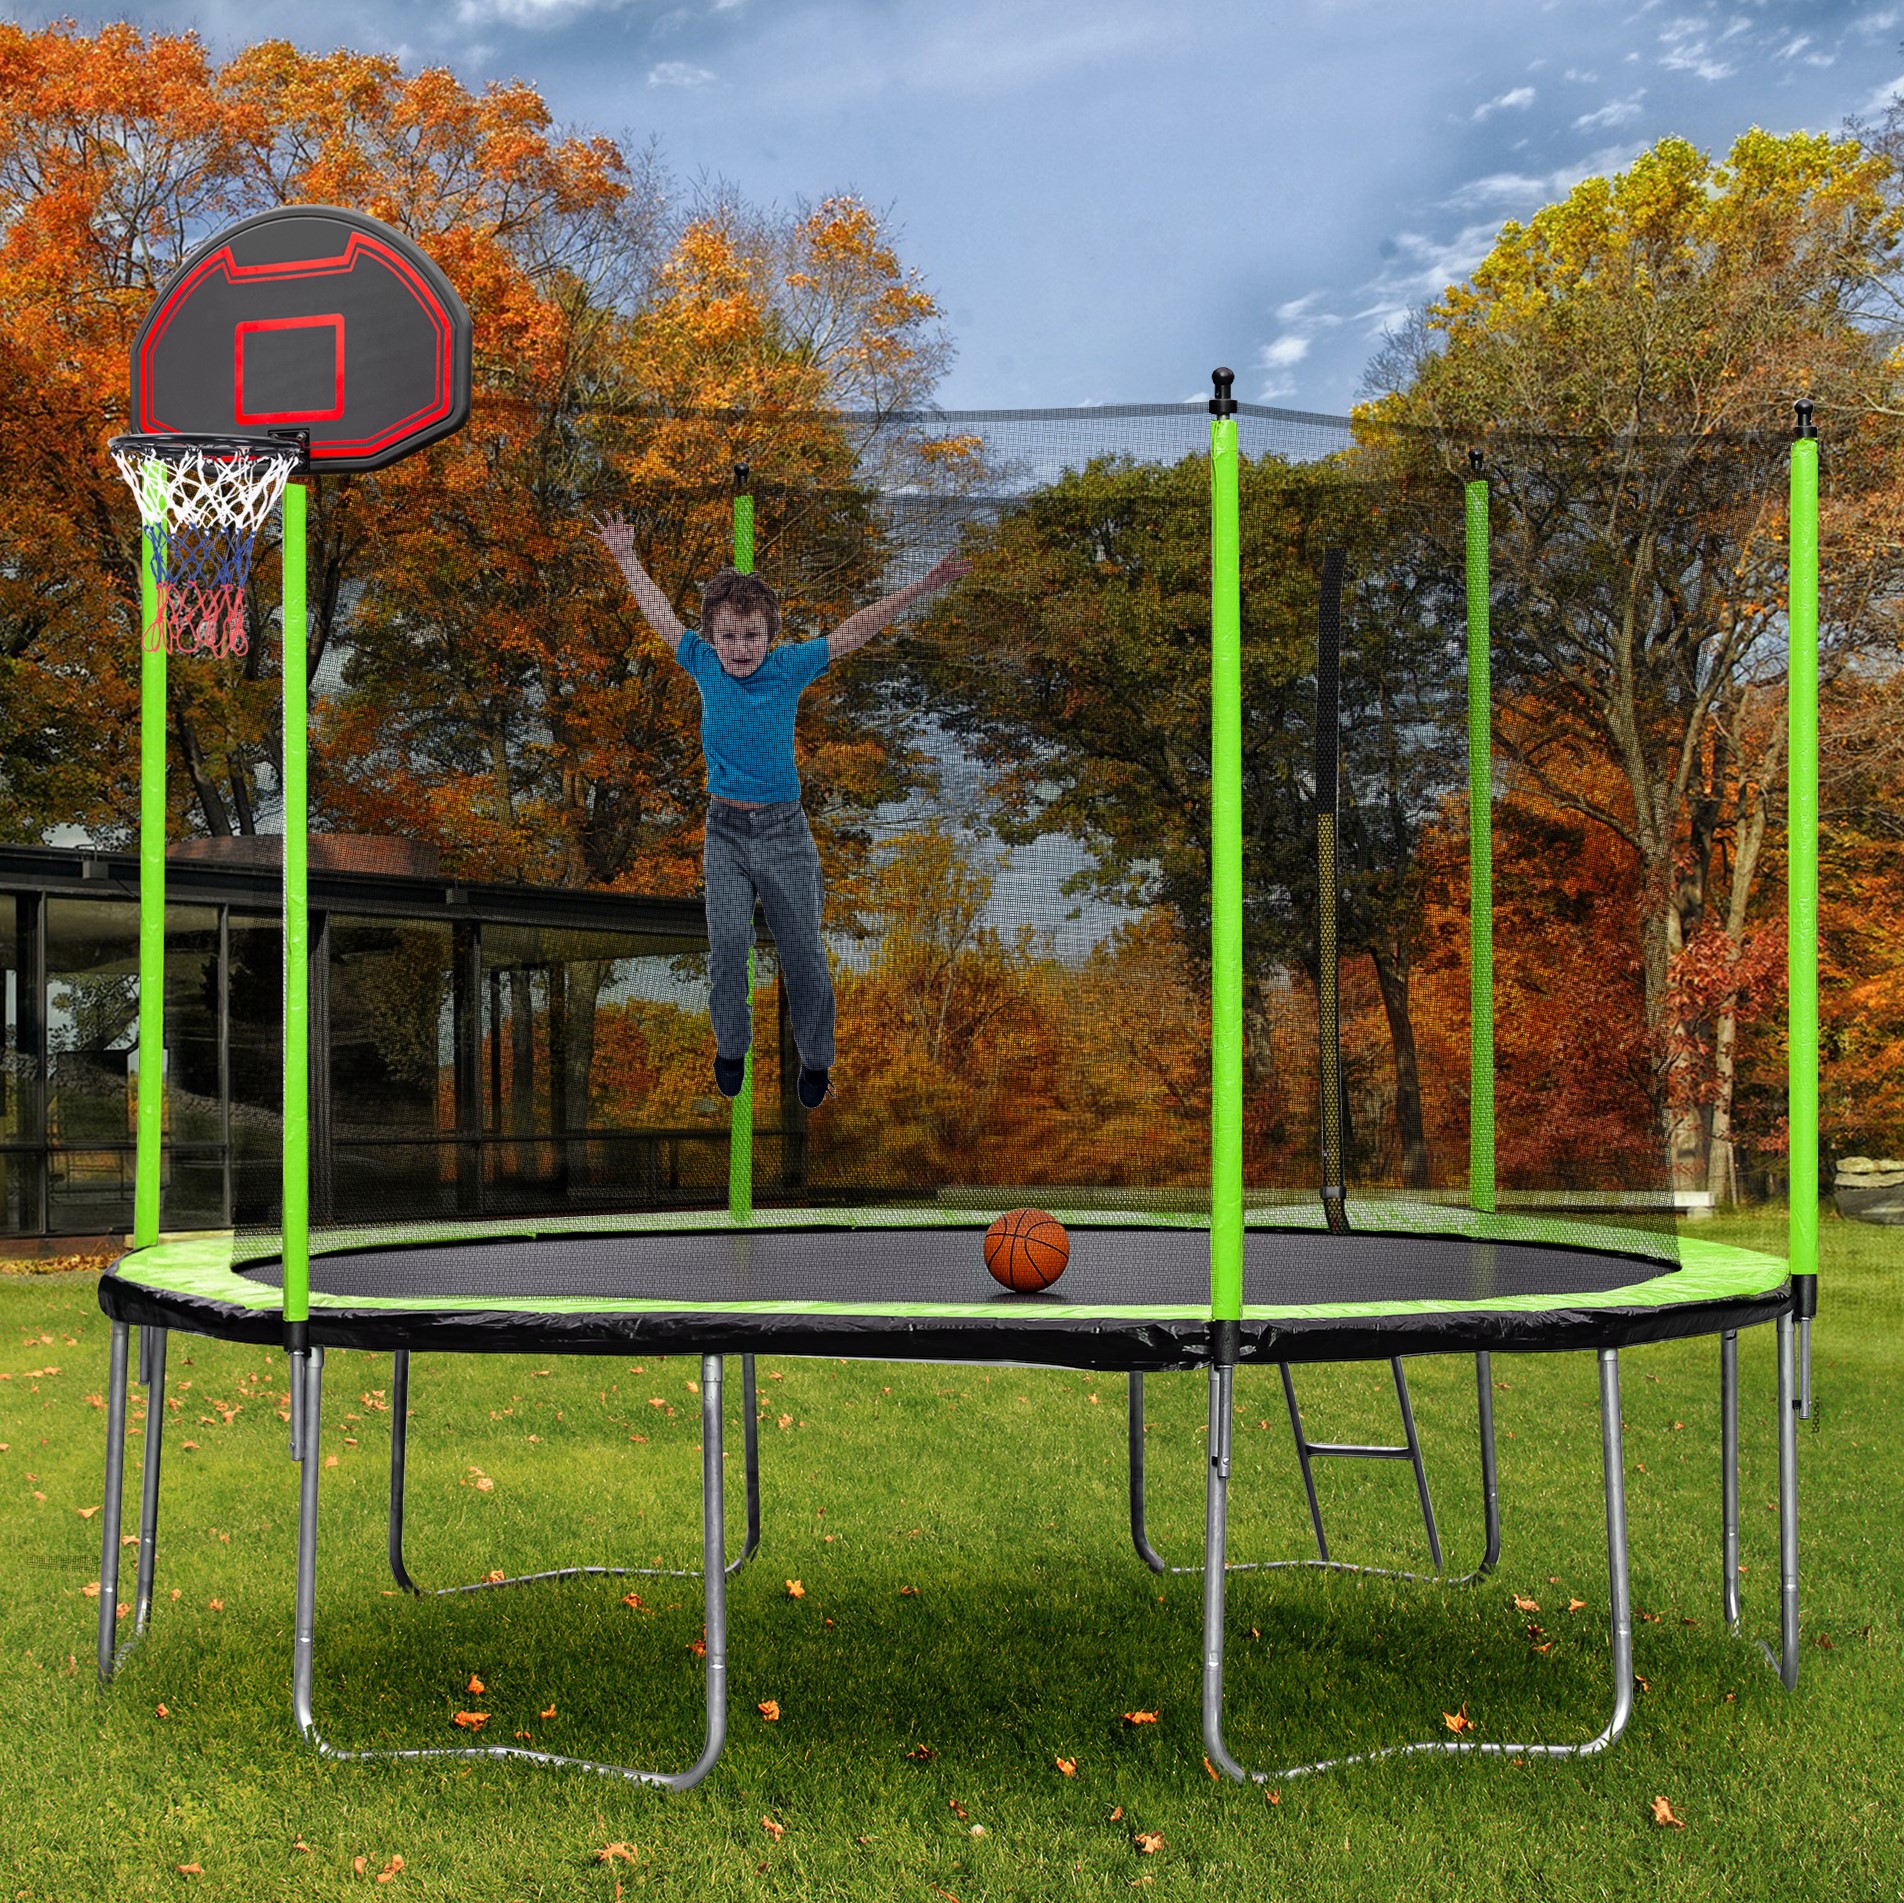 Upgraded 8FT 10FT 12FT 15FT 16FT Trampolines with Enclosure Net and Ladder, ASTM Approved Outdoor High-Capacity Family Yard